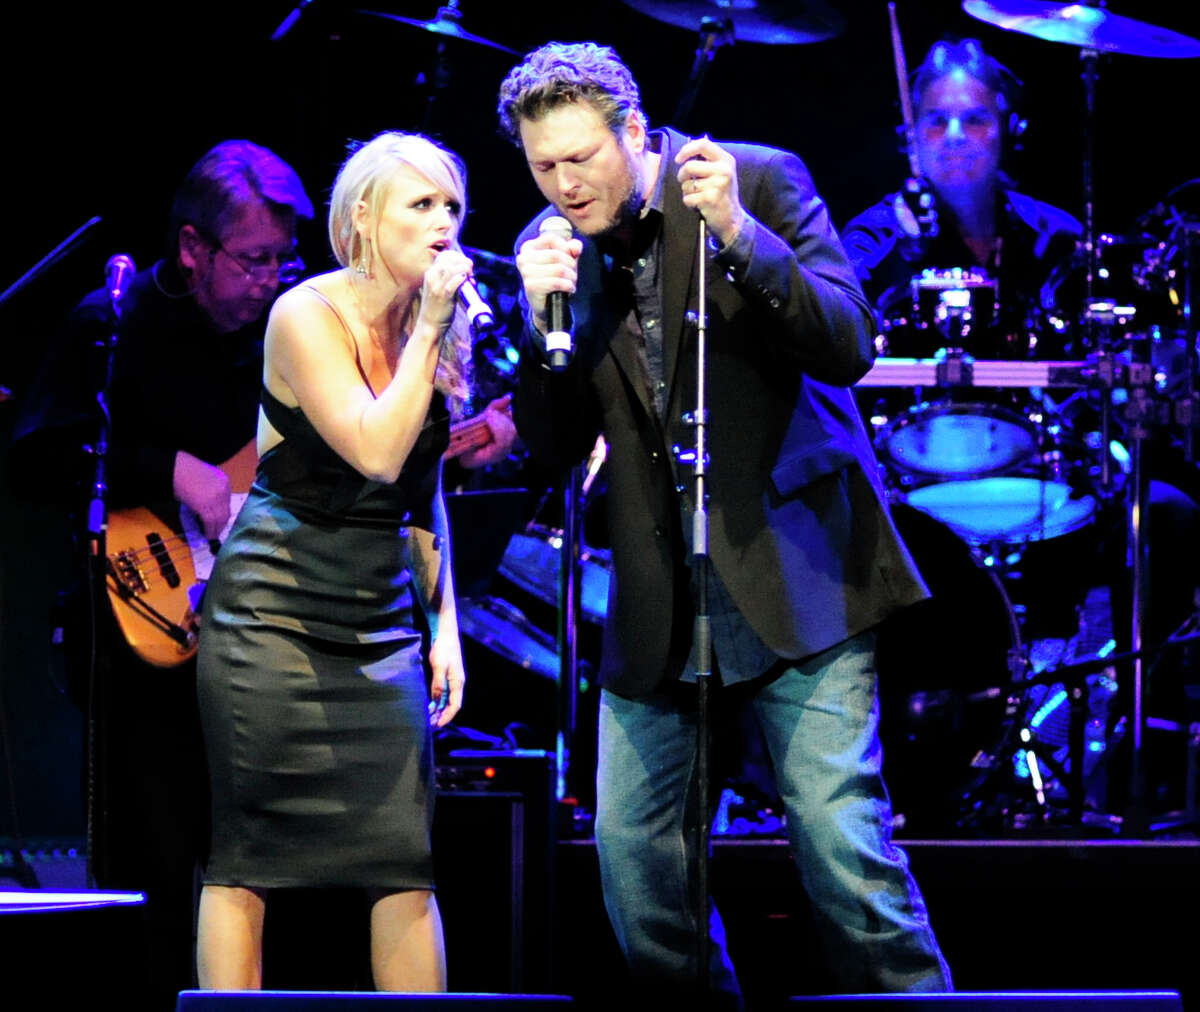 Miranda Lambert and Blake Shelton perform at the tribute concert for the late George Jones, Friday, Nov. 22, 2013, in Nashville, Tenn. Jones had originally scheduled his final show for Friday. He died April 26. (AP Photo/Mike Strasinger)